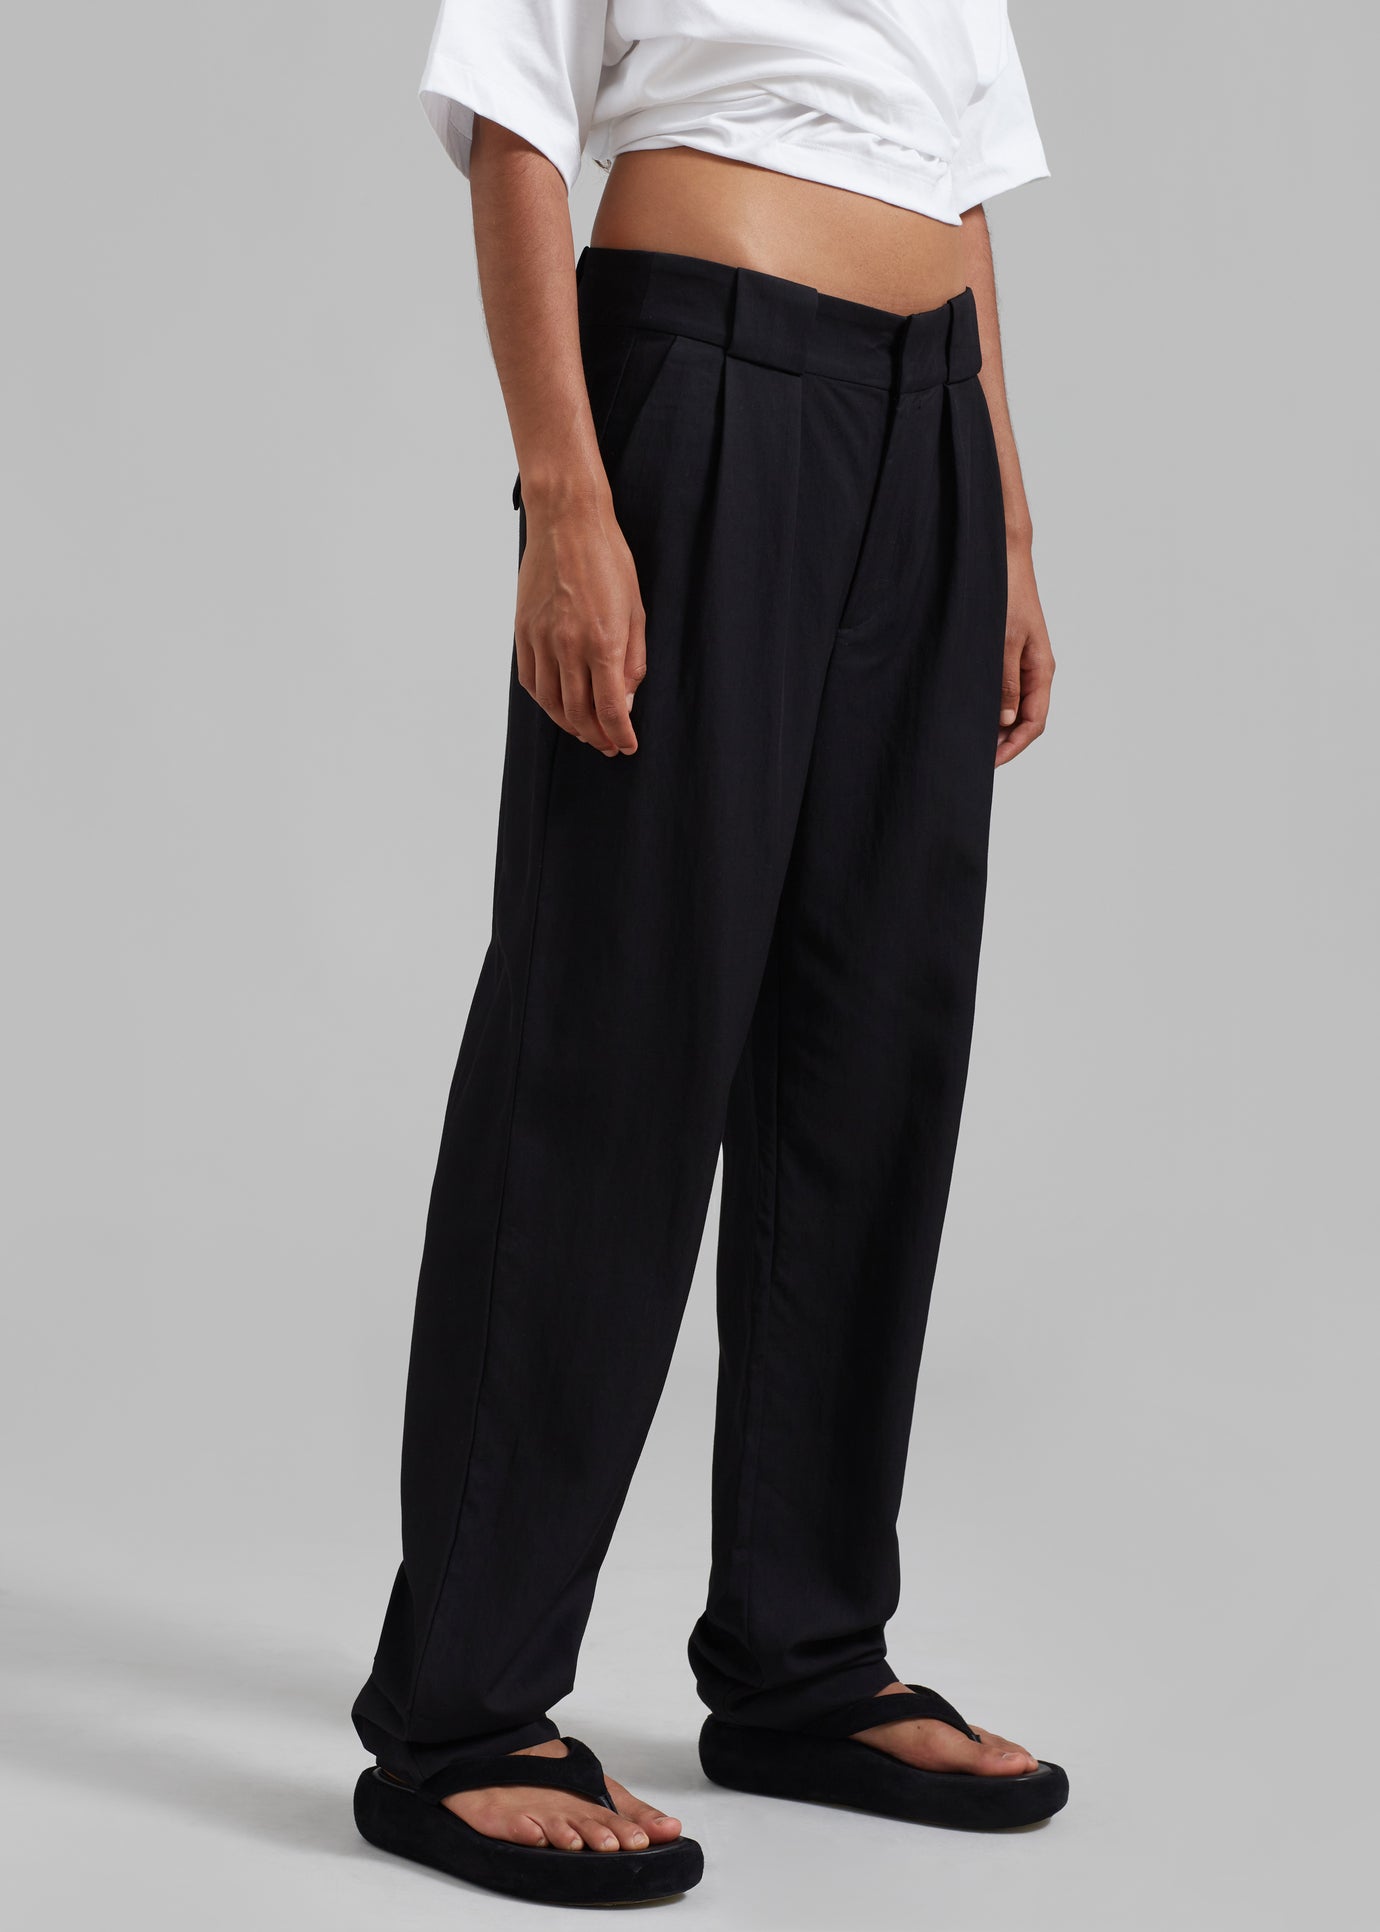 Proenza Schouler White Label Drapey Suiting Trousers - Black